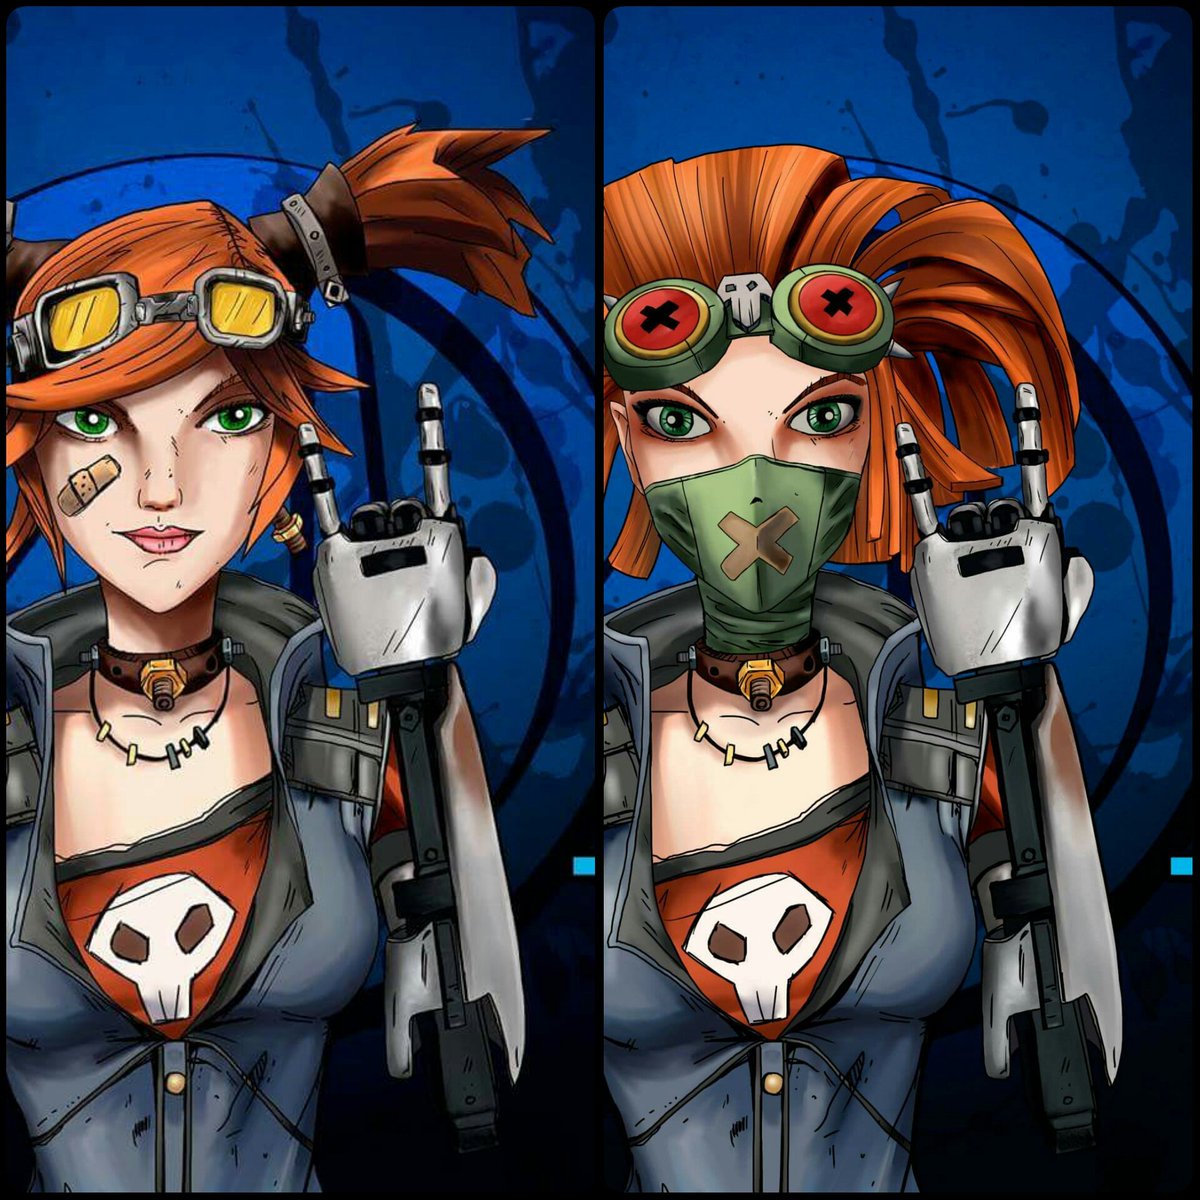 Some #Borderlands #fanart #Gaige with special XXX-Head variant